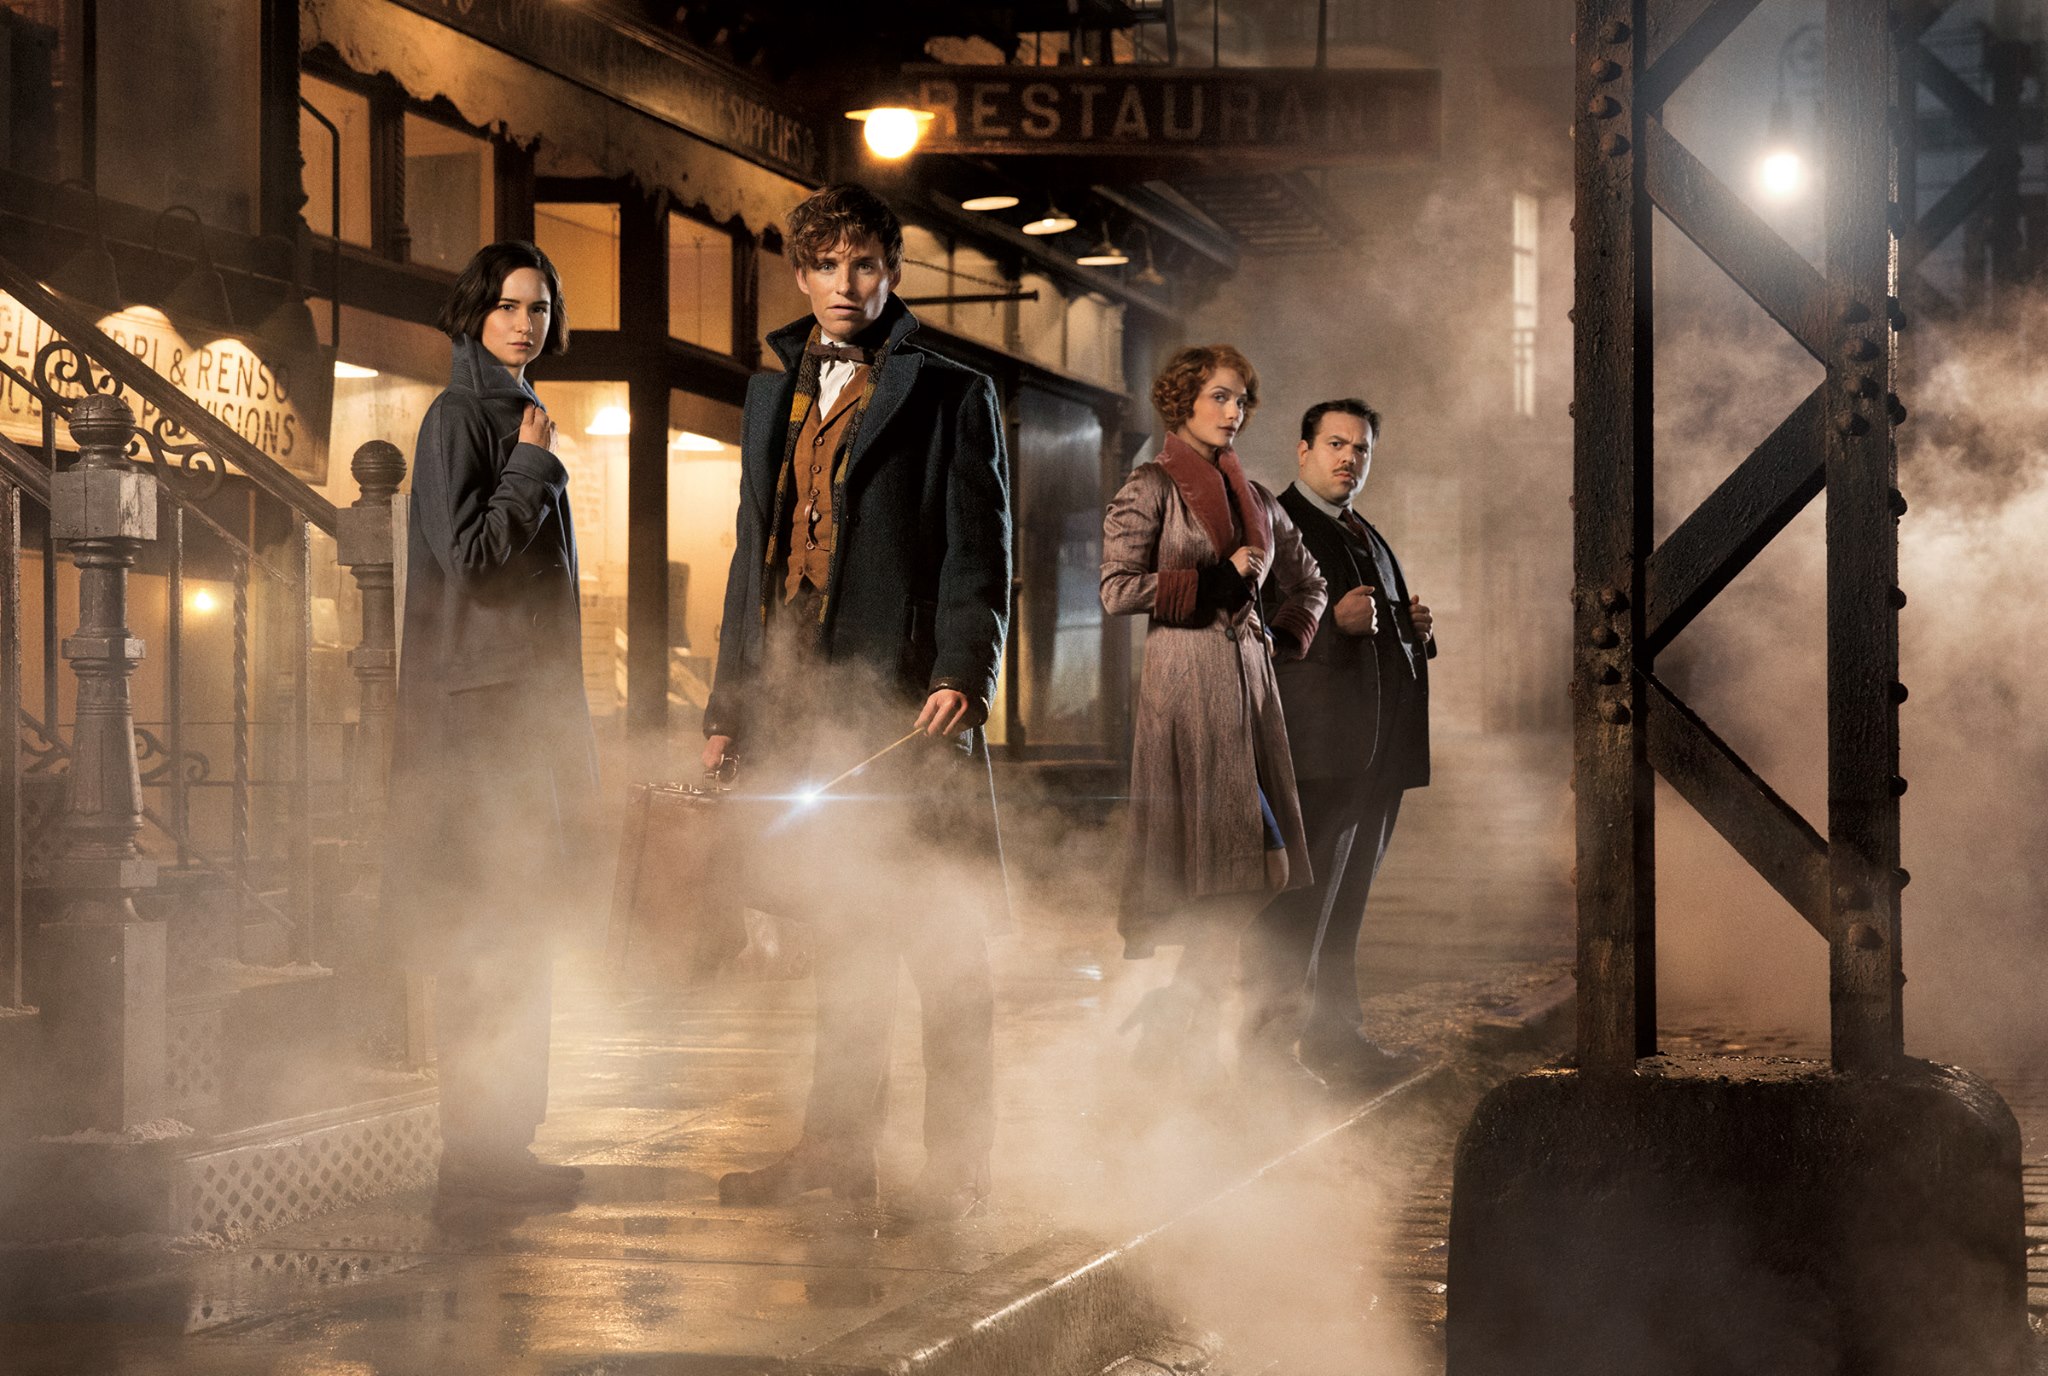 Image: Fantastic Beasts Movie's Facebook page